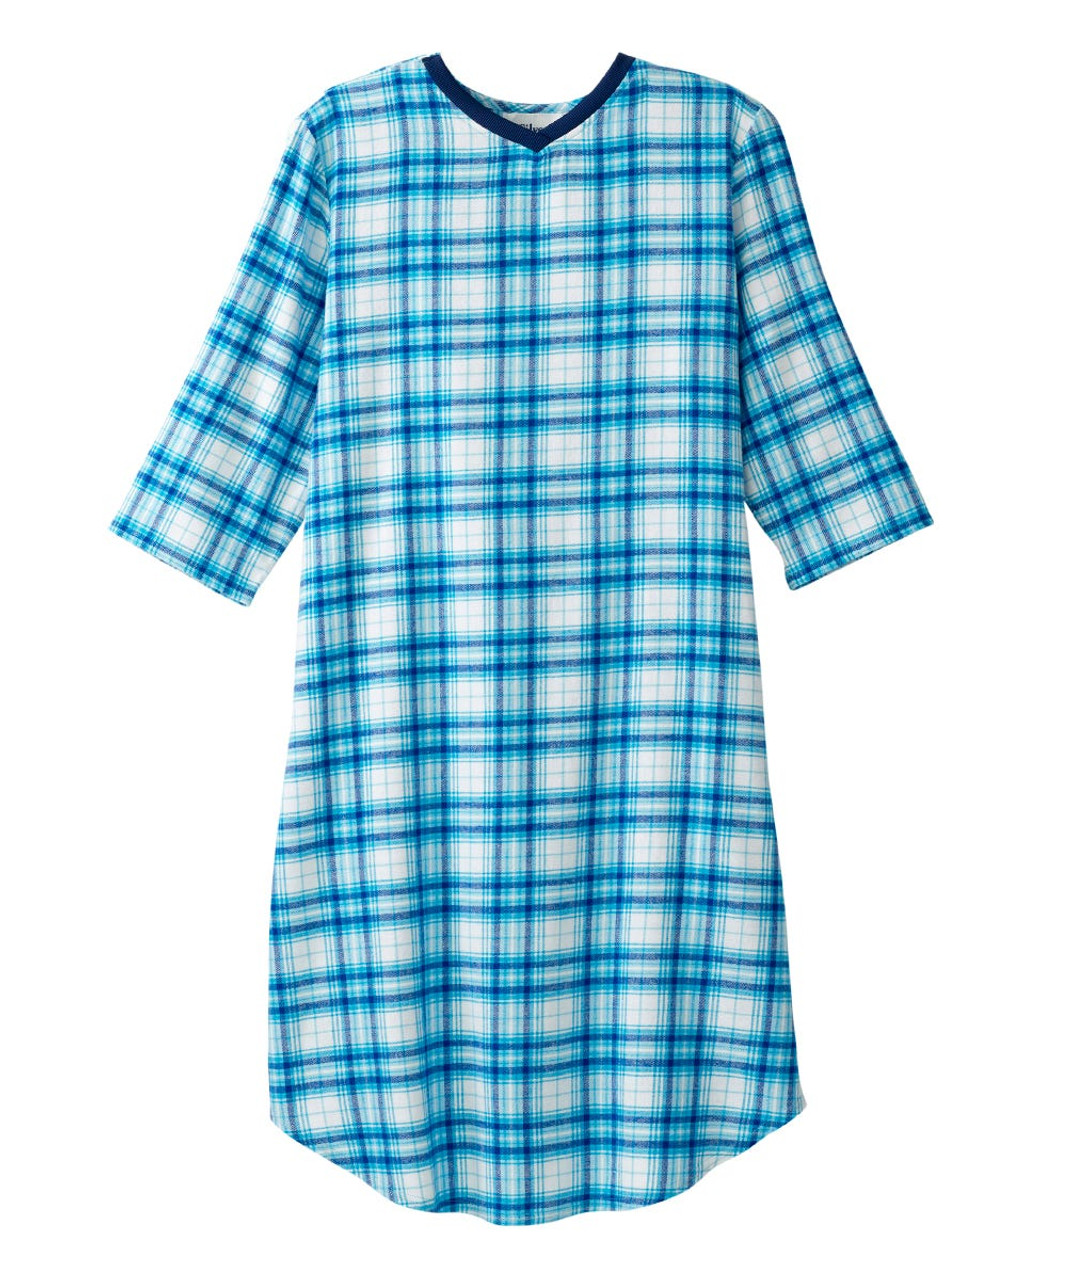 Silverts SV50120 Senior Men's Adaptive Open Back Flannel Nightgown Turquoise Plaid, Size=XL, SV50120-TQUP-XL